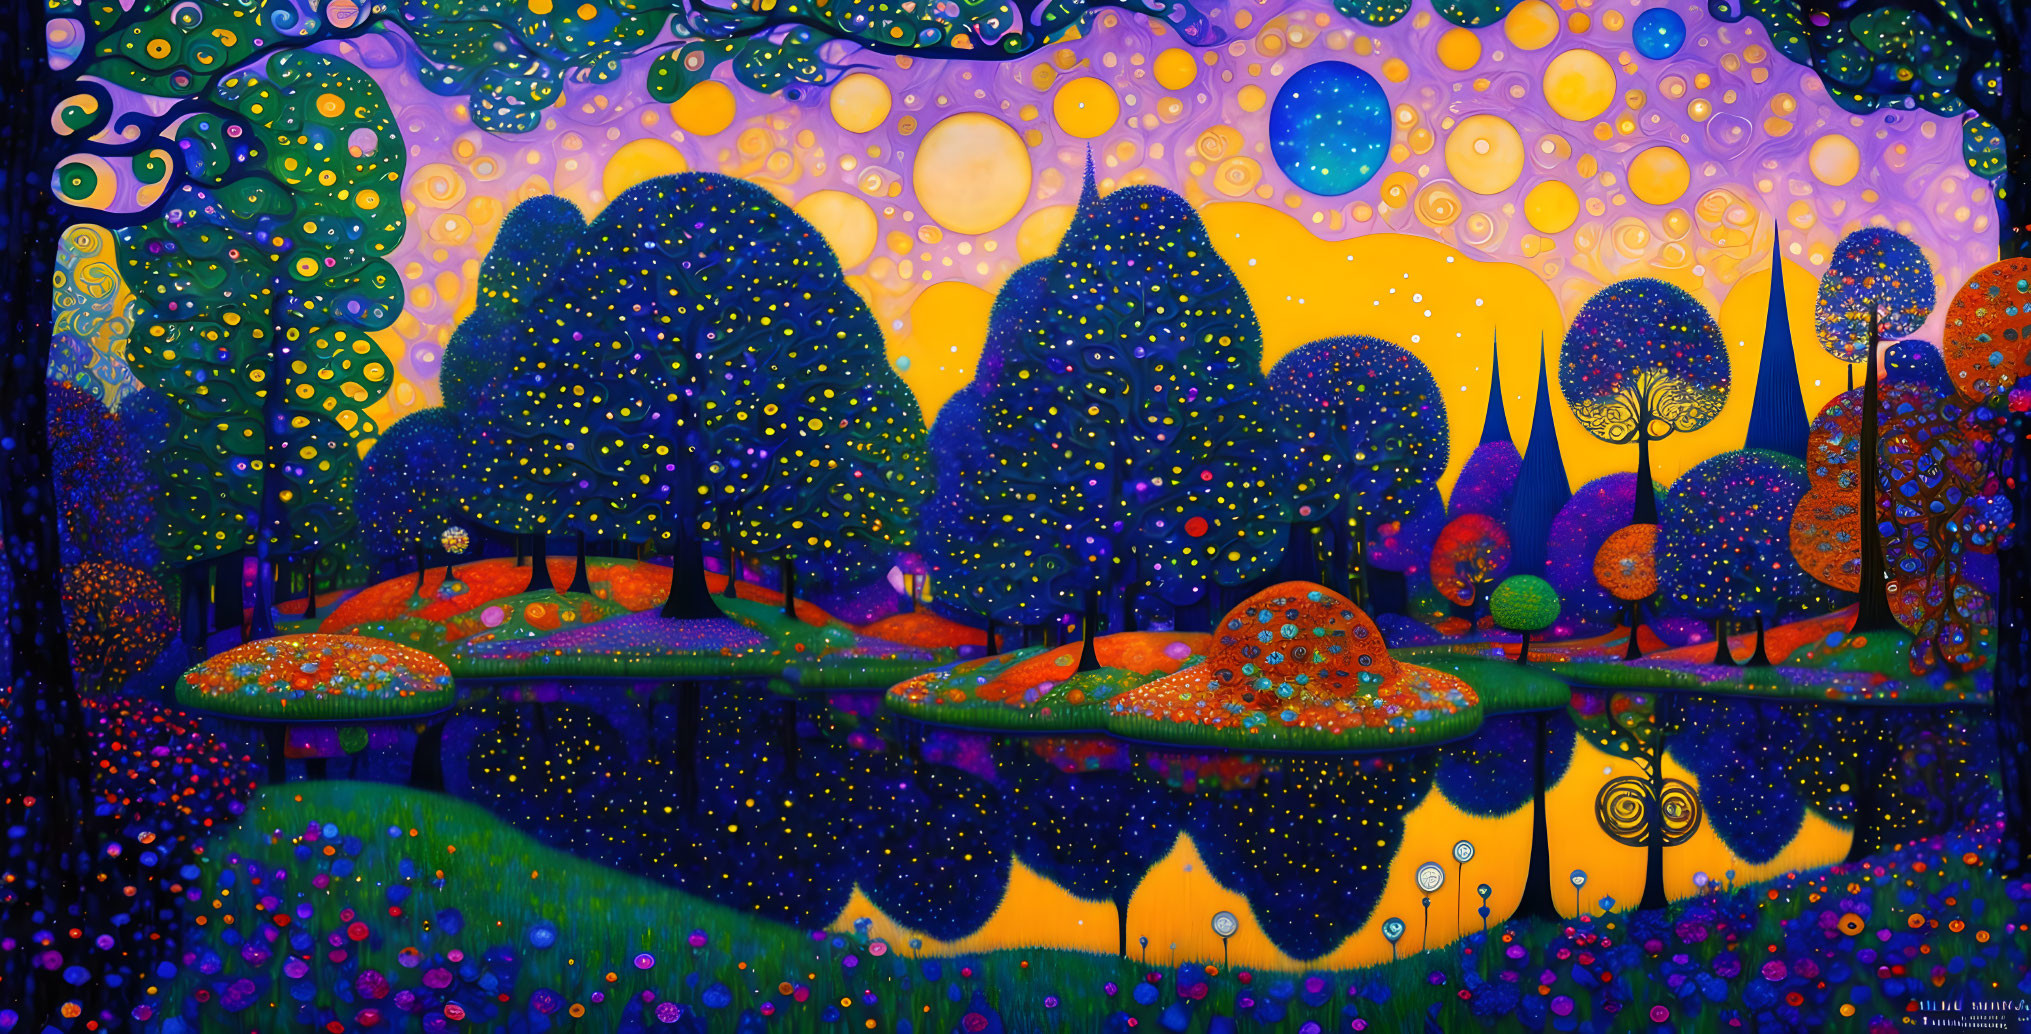 Whimsical landscape painting with stylized trees and colorful patterns